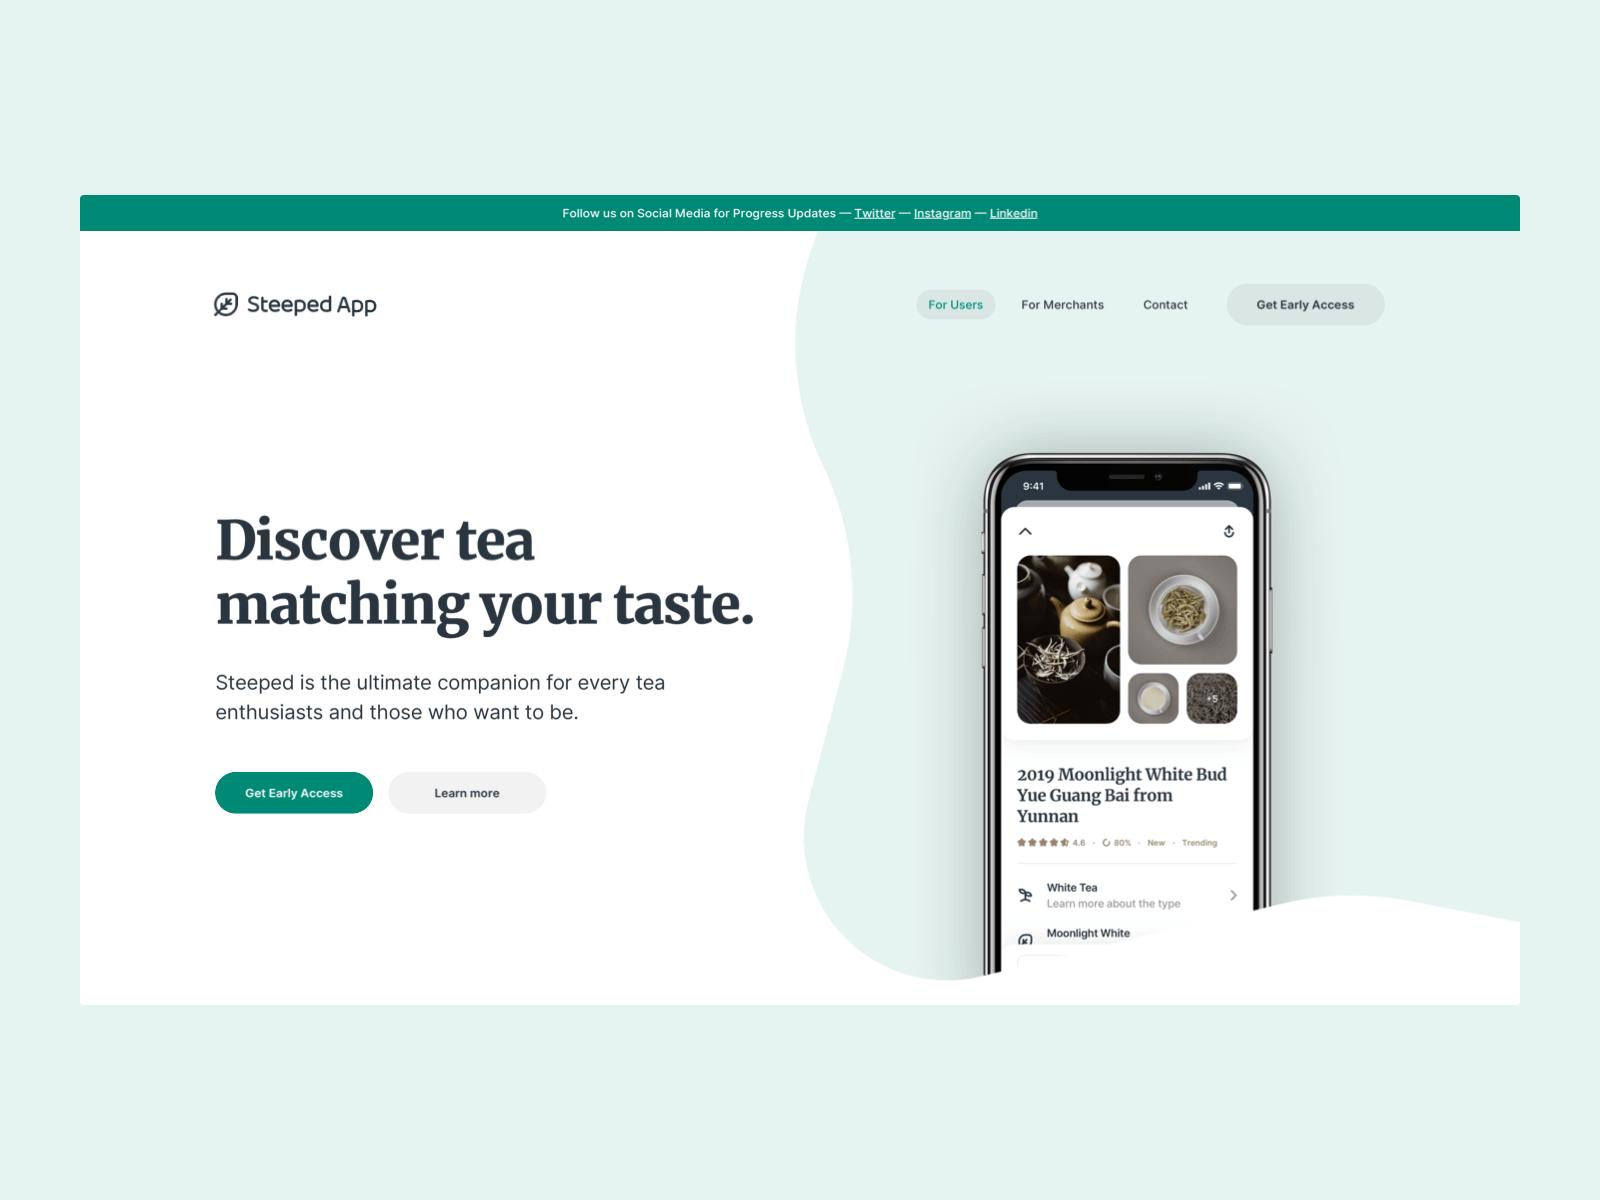 Steeped - Discover tea matching your taste